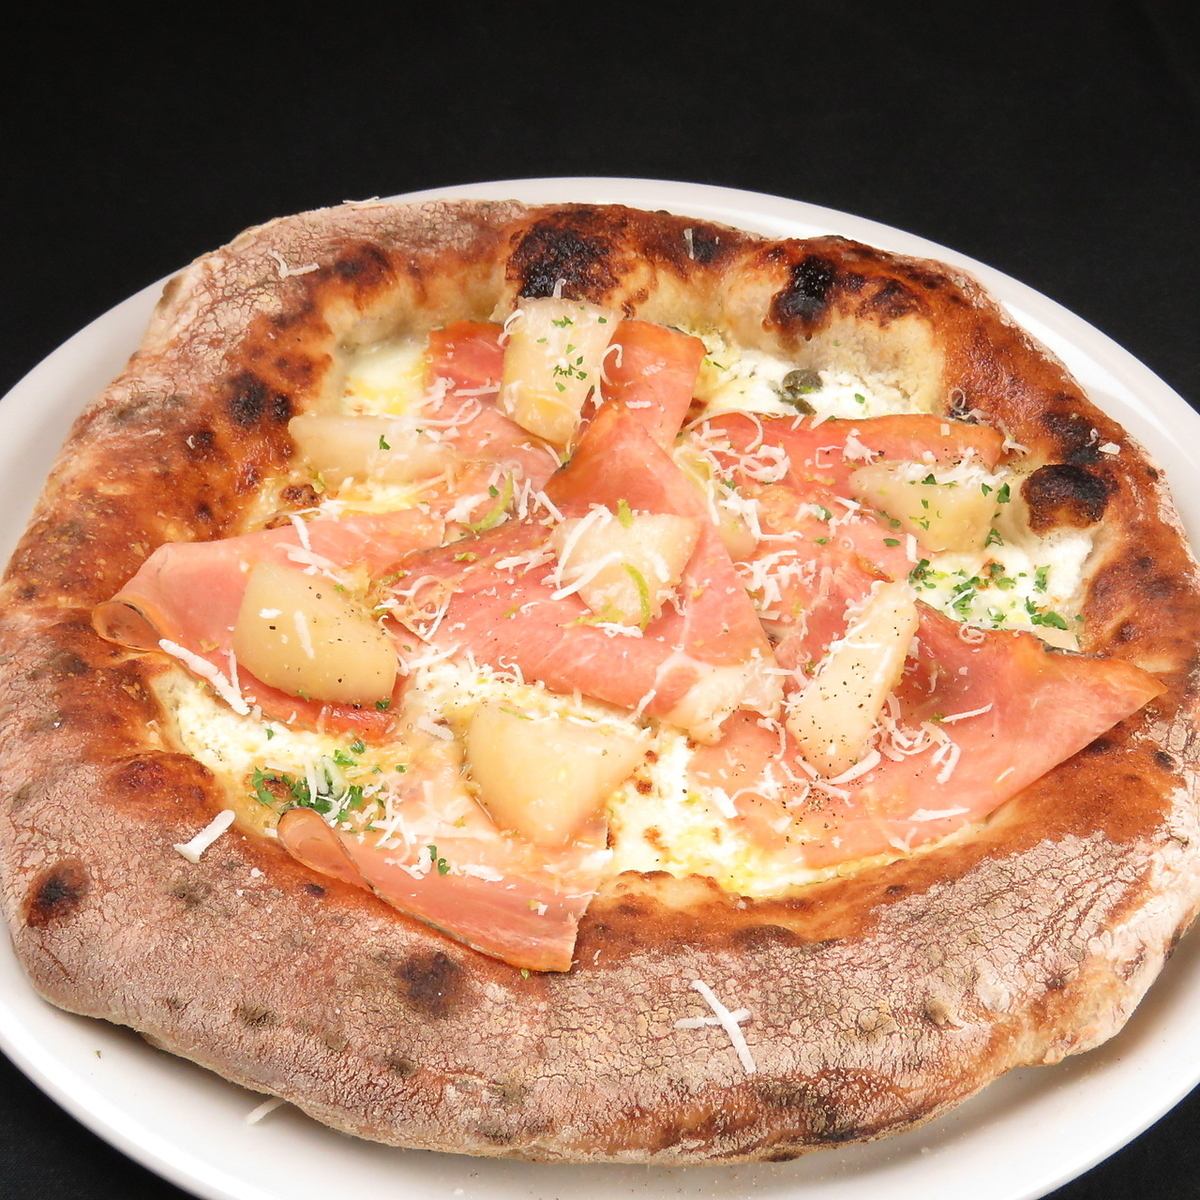 Enjoy kiln-baked pizza at a hideaway Italian ☆ Let's meet girls with meat dishes and dolce ♪